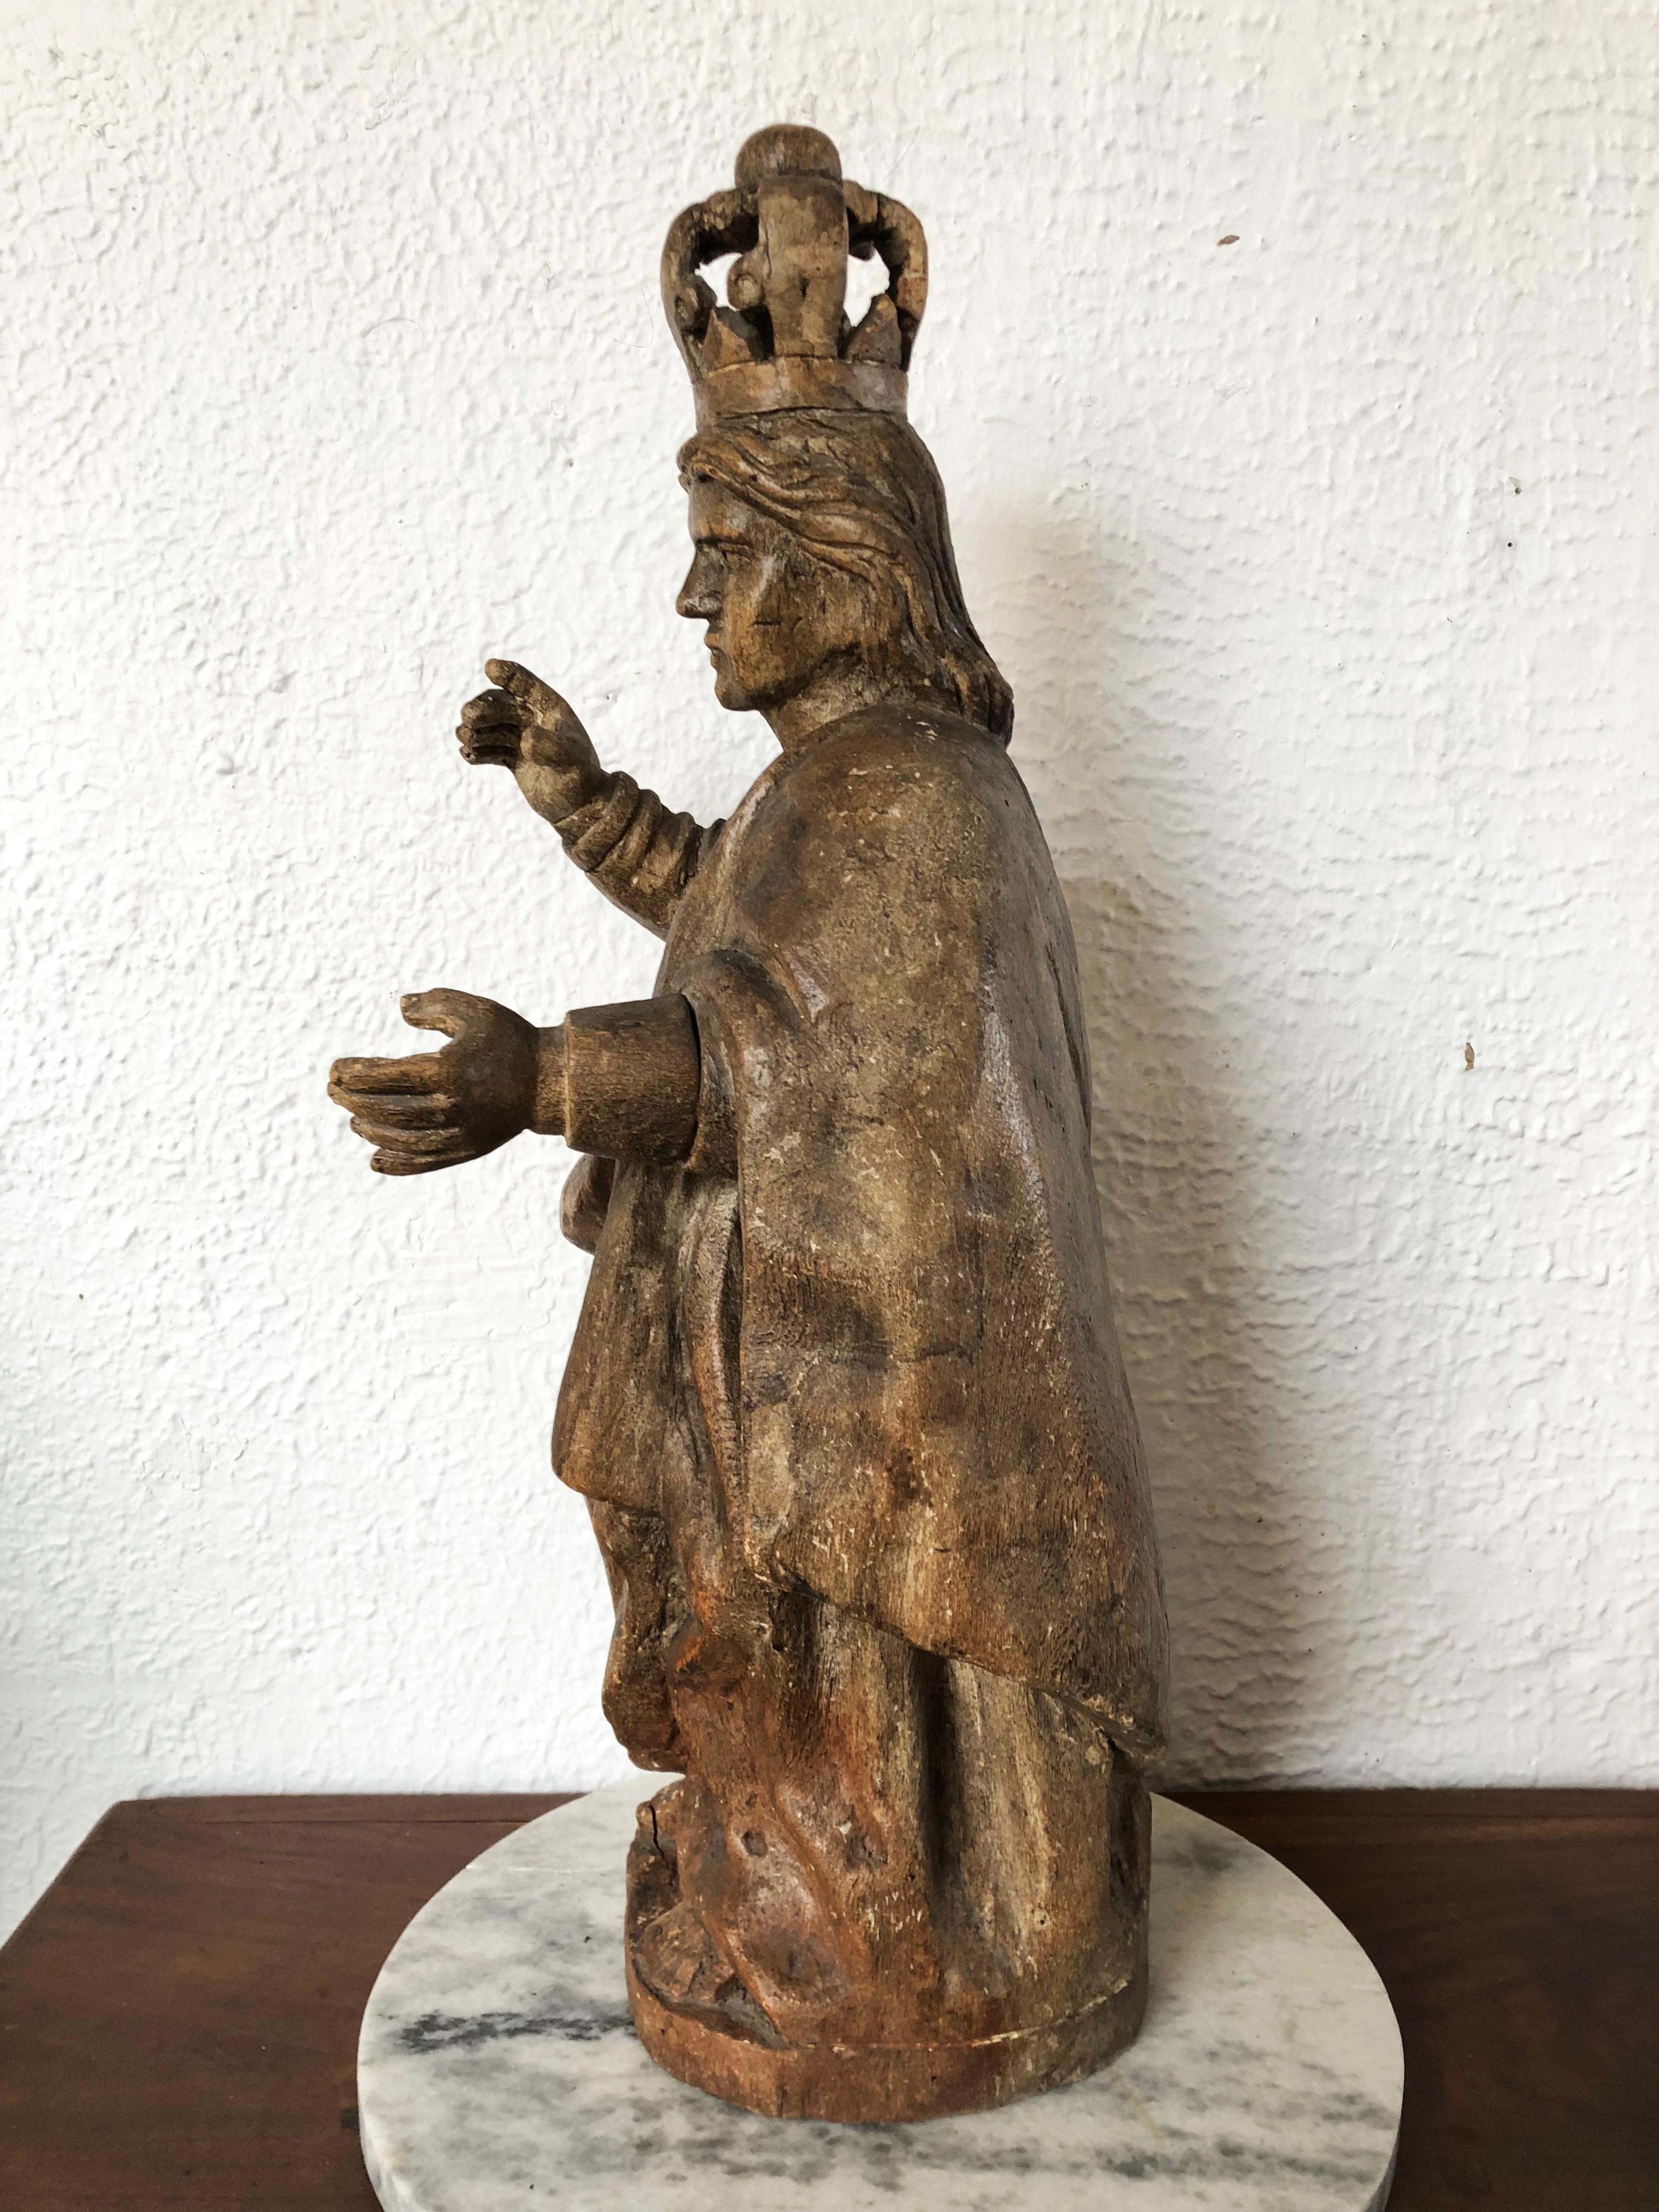 Hand carved religious figure found in Western Mexico, circa 1900.